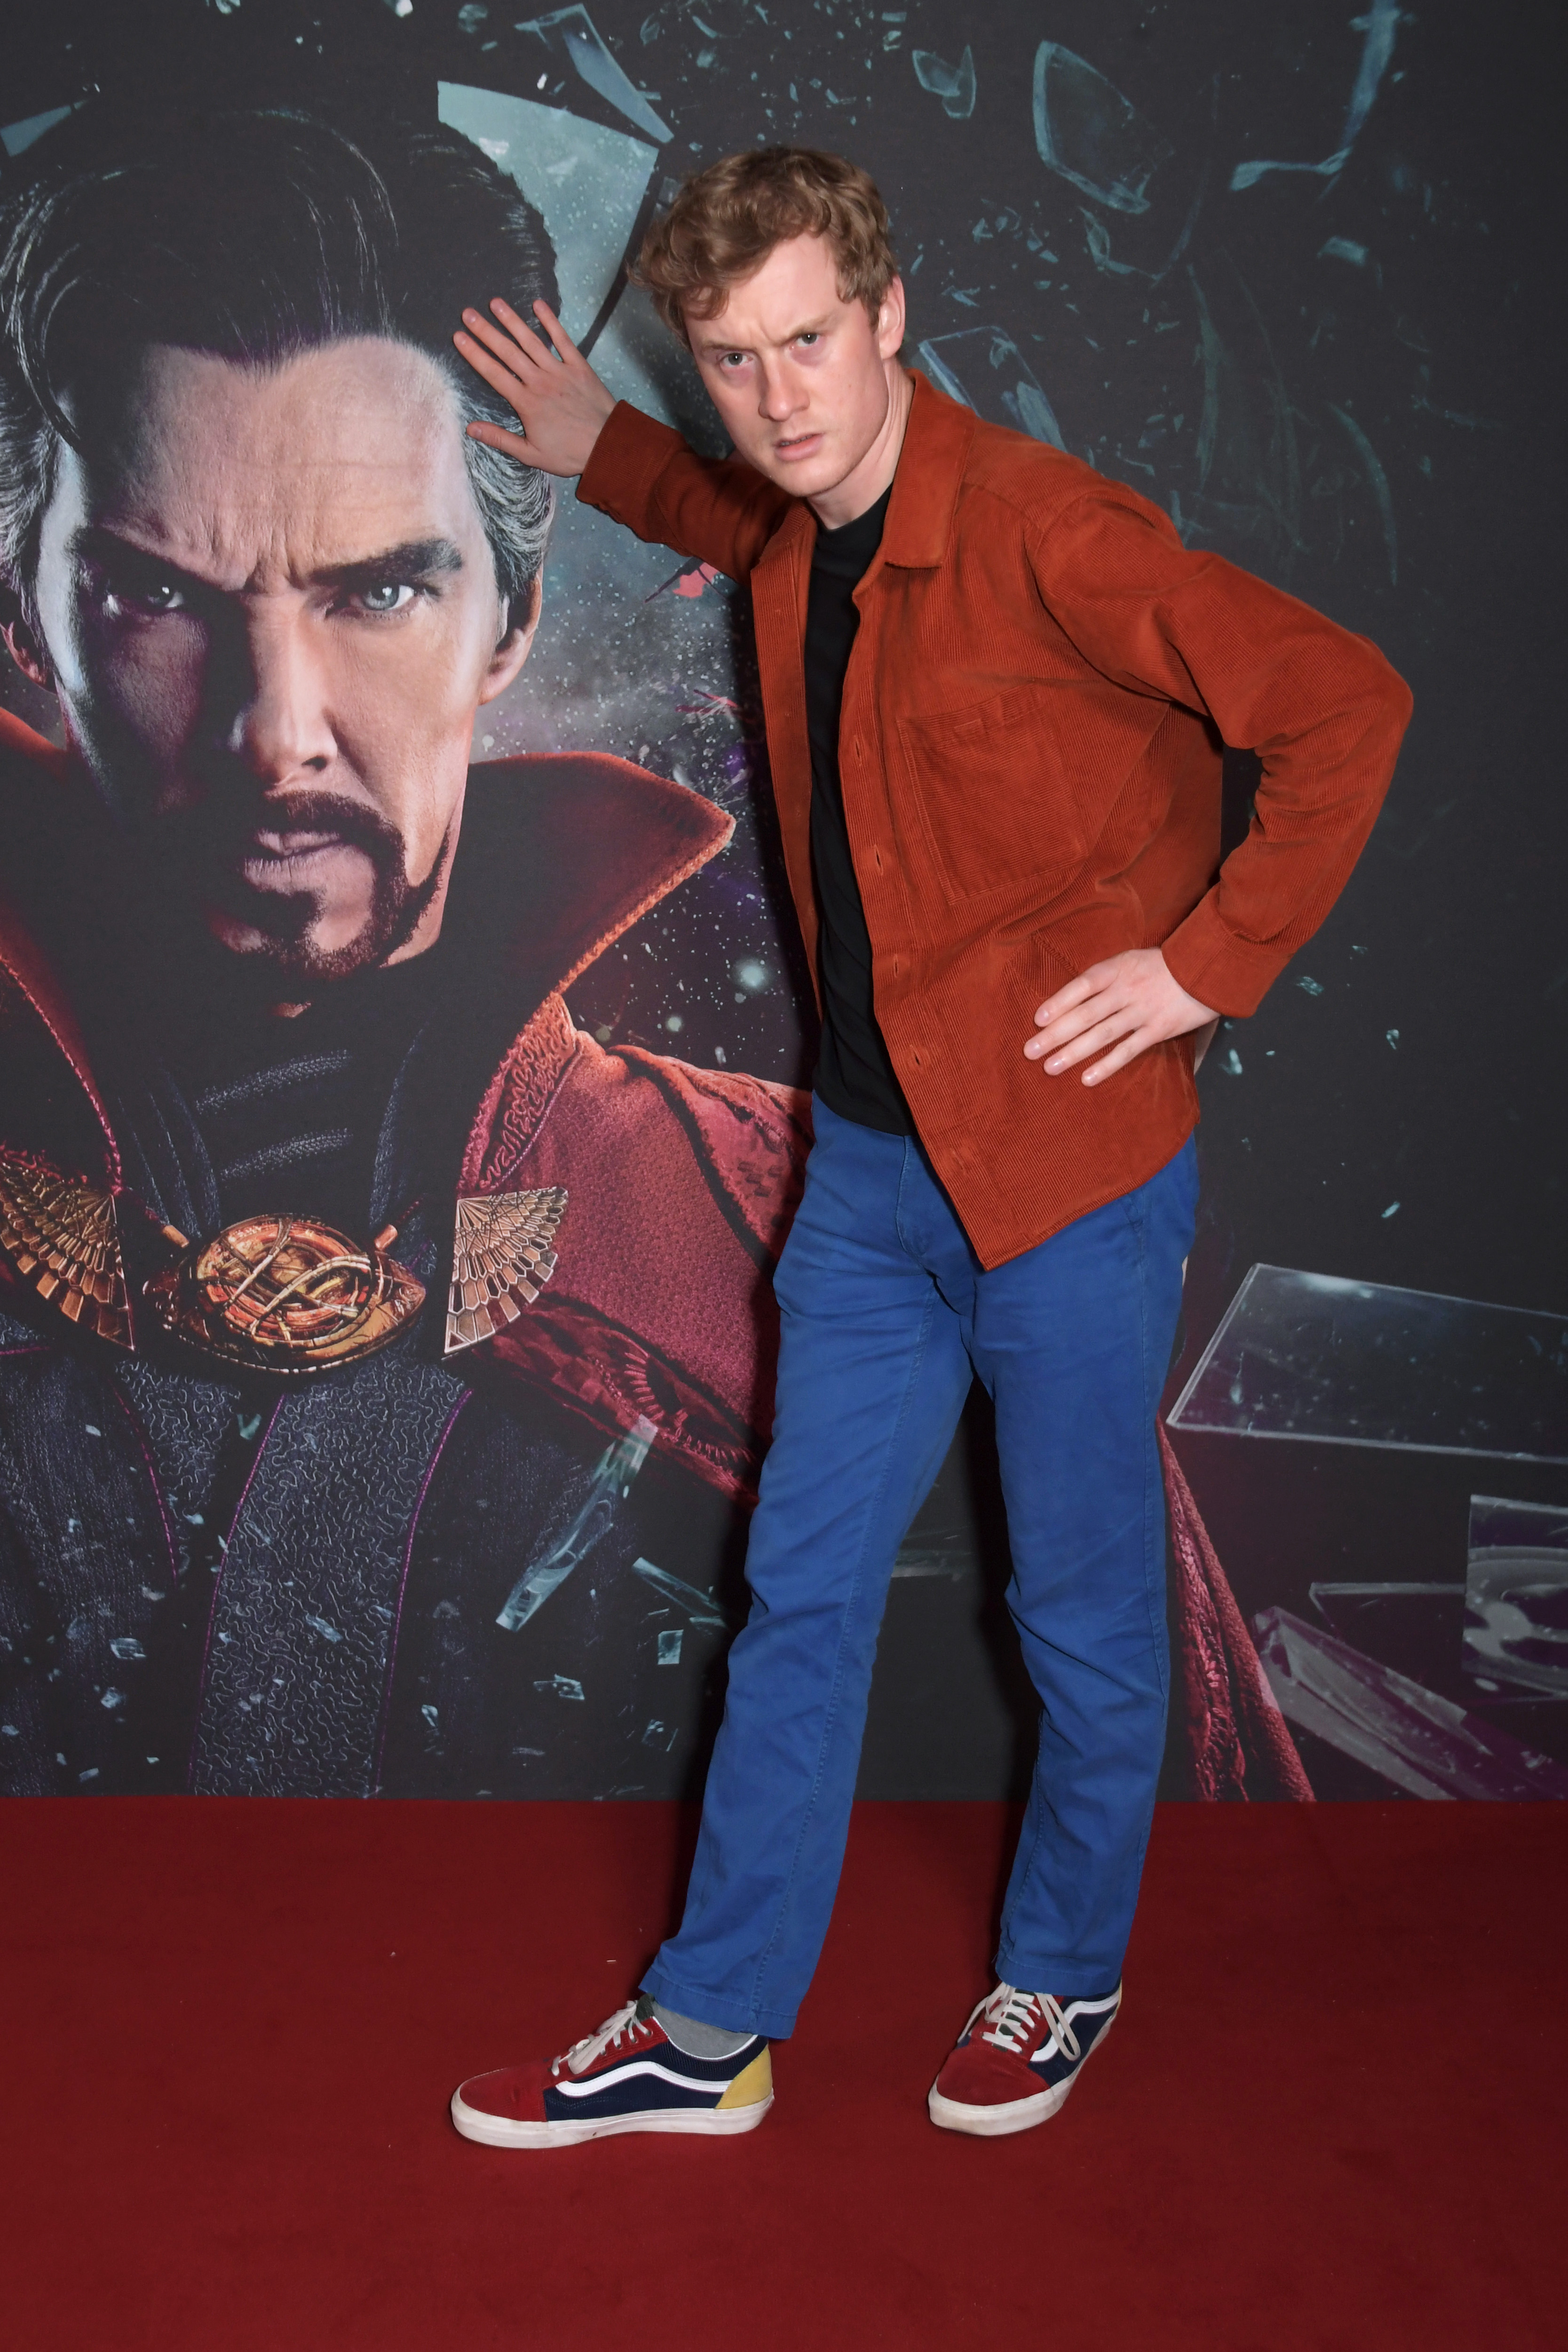 James Acaster attends a multimedia screening of "Doctor Strange In The Multiverse Of Madness" at Cineworld Leicester Square on May 3, 2022, in London, England | Source: Getty Images